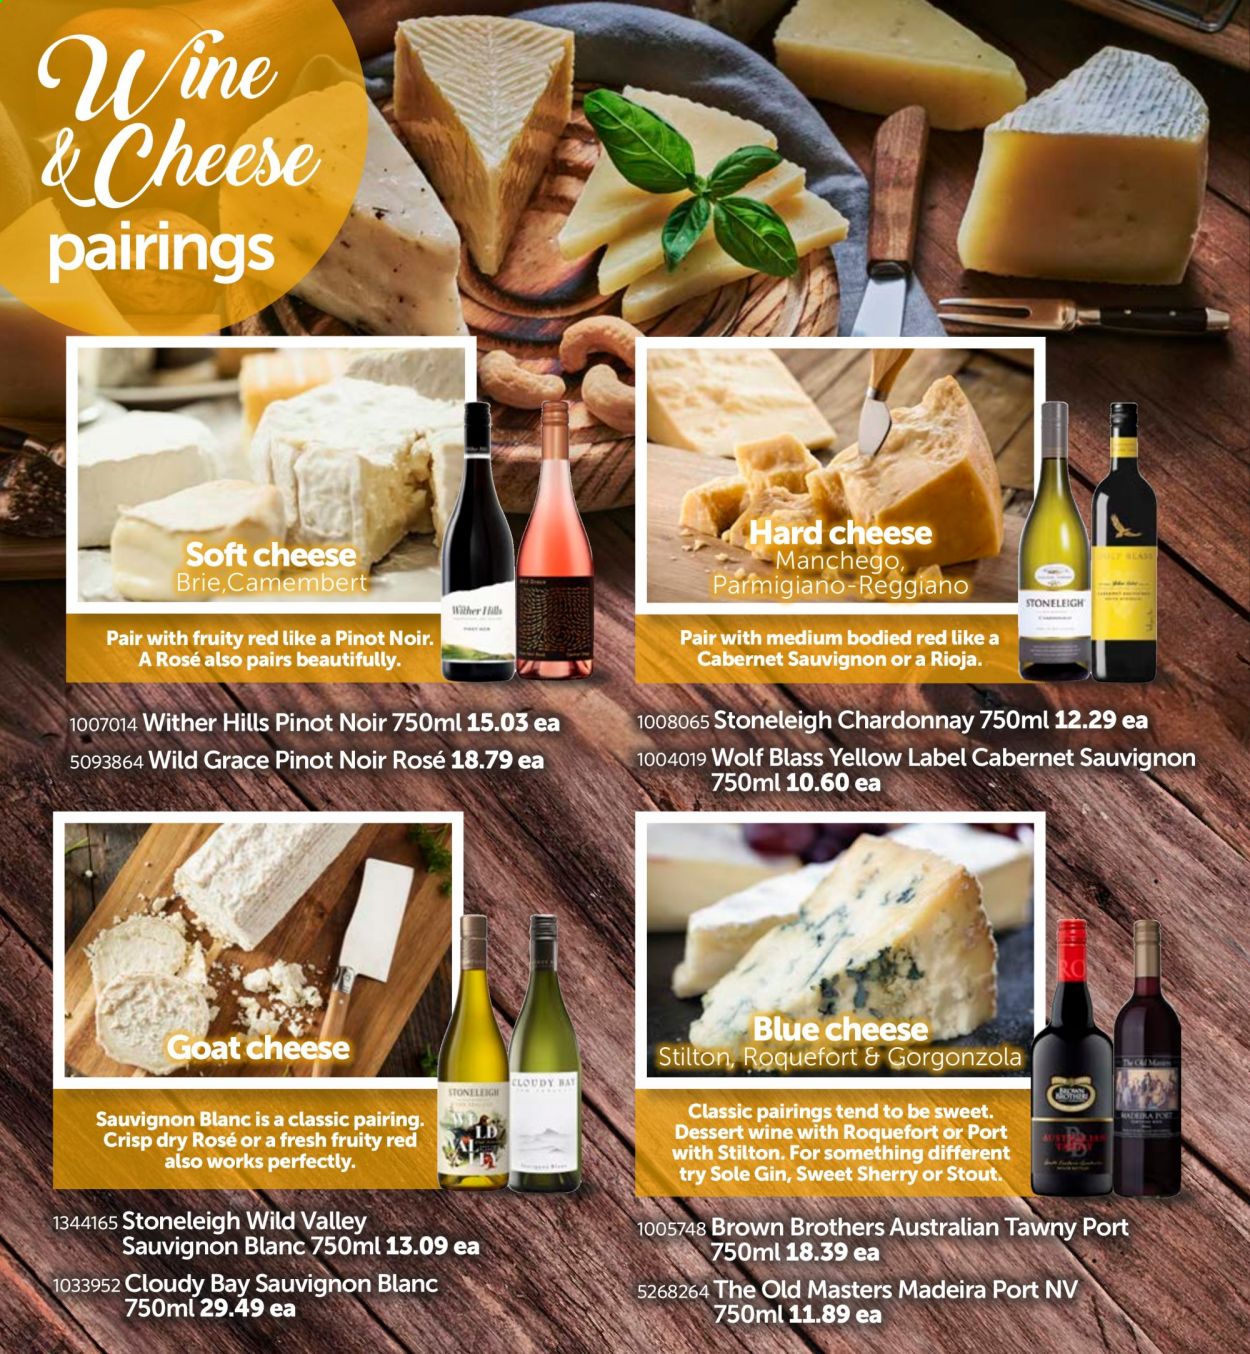 thumbnail - Gilmours mailer - 04.01.2021 - 31.01.2021 - Sales products - blue cheese, camembert, goat cheese, Manchego, soft cheese, Stilton, cheese, brie, gorgonzola, Parmigiano Reggiano, Cabernet Sauvignon, dessert wine, Chardonnay, wine, Pinot Noir, Wither Hills, Sauvignon Blanc, gin, sherry, BROTHERS. Page 22.